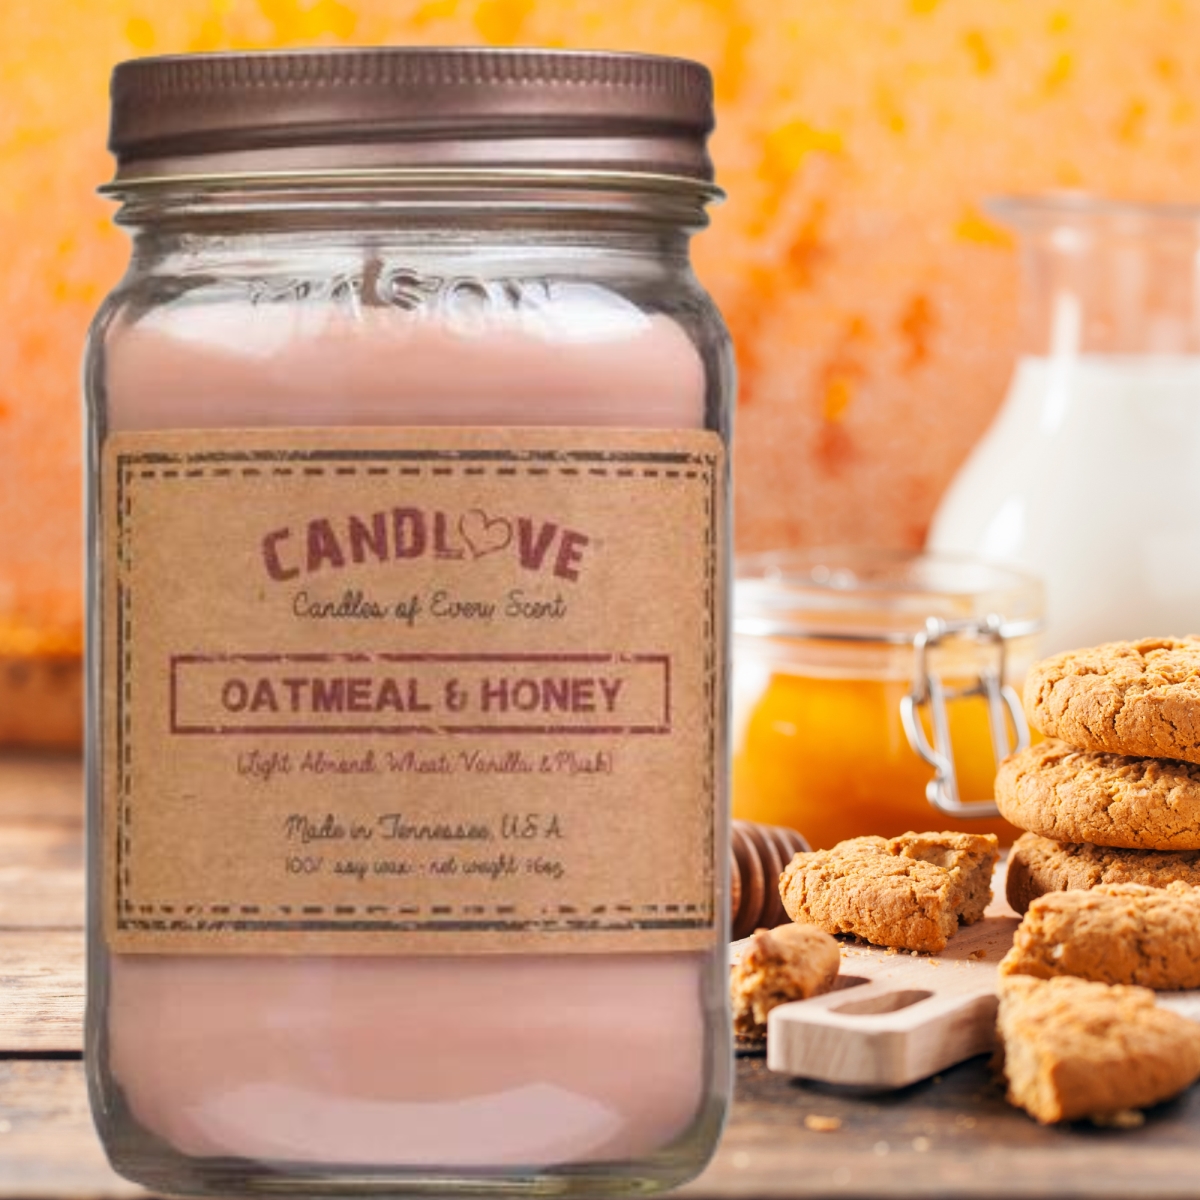 Picture of PPI SUPPLIES Oatmeal-C Candlove Oatmeal Honey Scented Candle - Non-Toxic 100% Soy Candle - Handmade & Hand Poured Long Burning Candle - Highly Scented All Natural Clean Burning Candle (16 OZ Mason Jar) Made in The USA